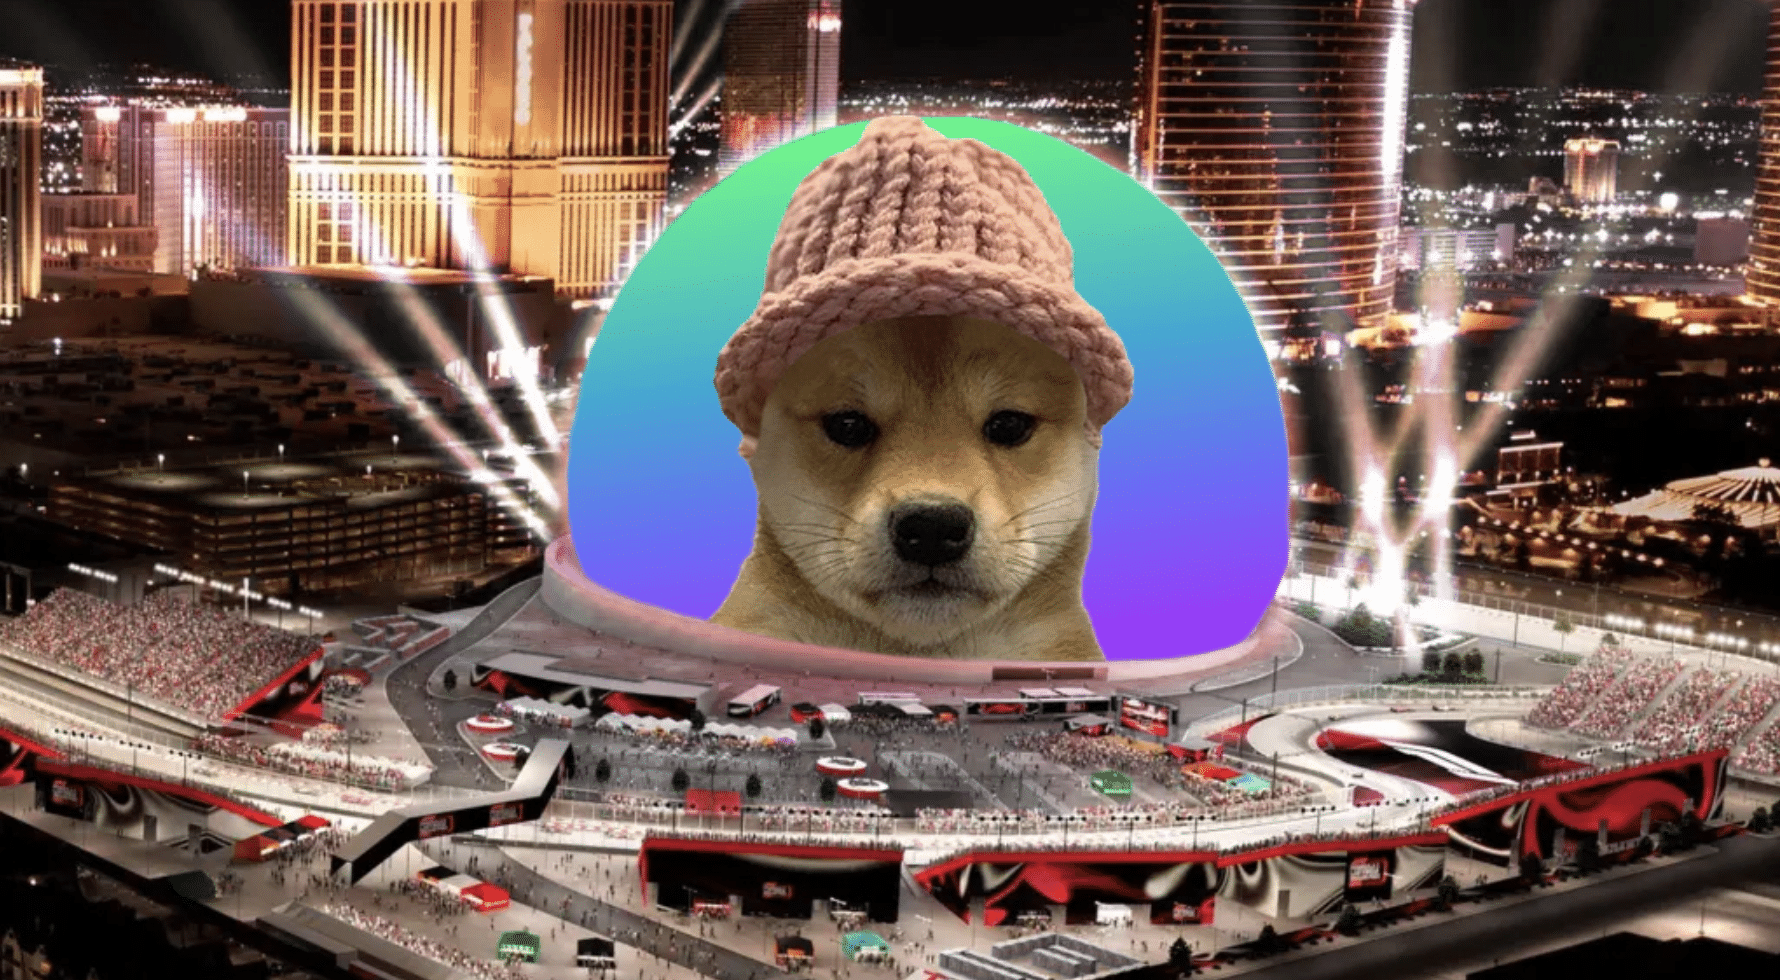 Edited photo with Dogwifhat meme placed on a sphere in Las Vegas (https://wif-sphere.vercel.app/)